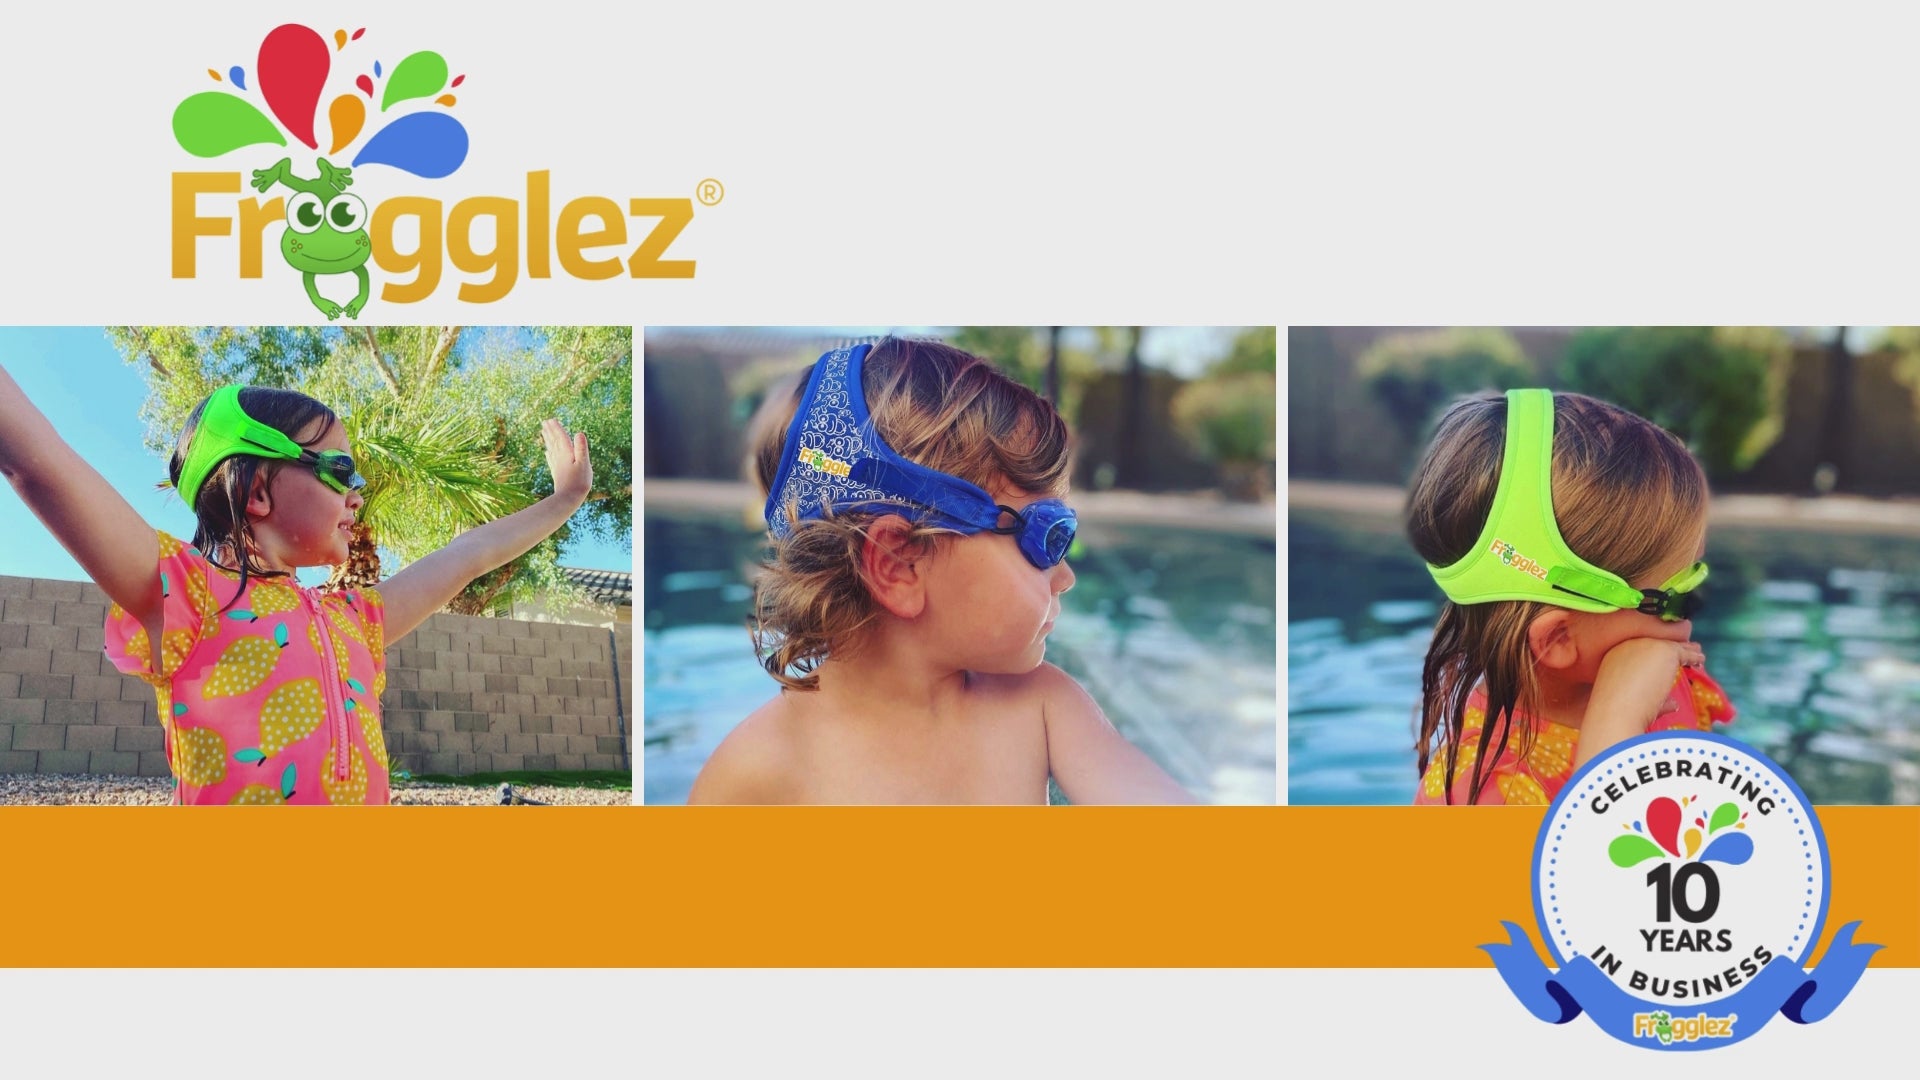 Swim goggles for kids that don't pull hair – Frogglez Swimming Goggles